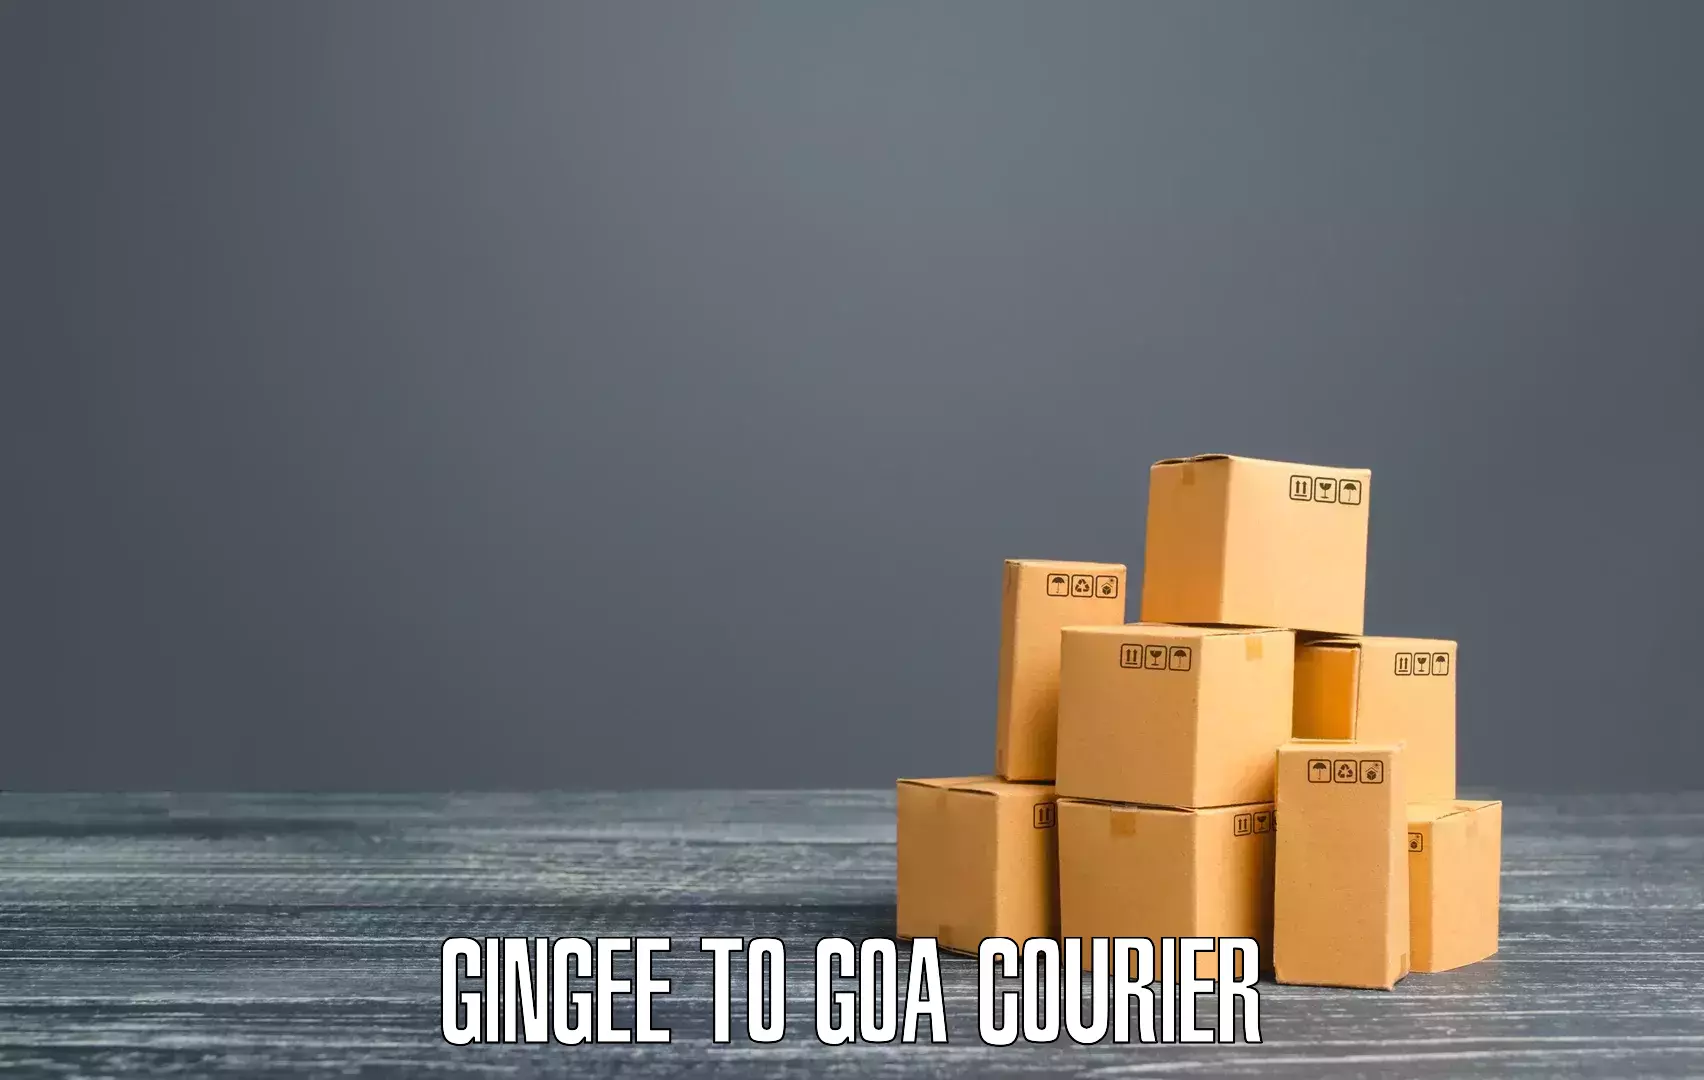 Easy access courier services in Gingee to Goa